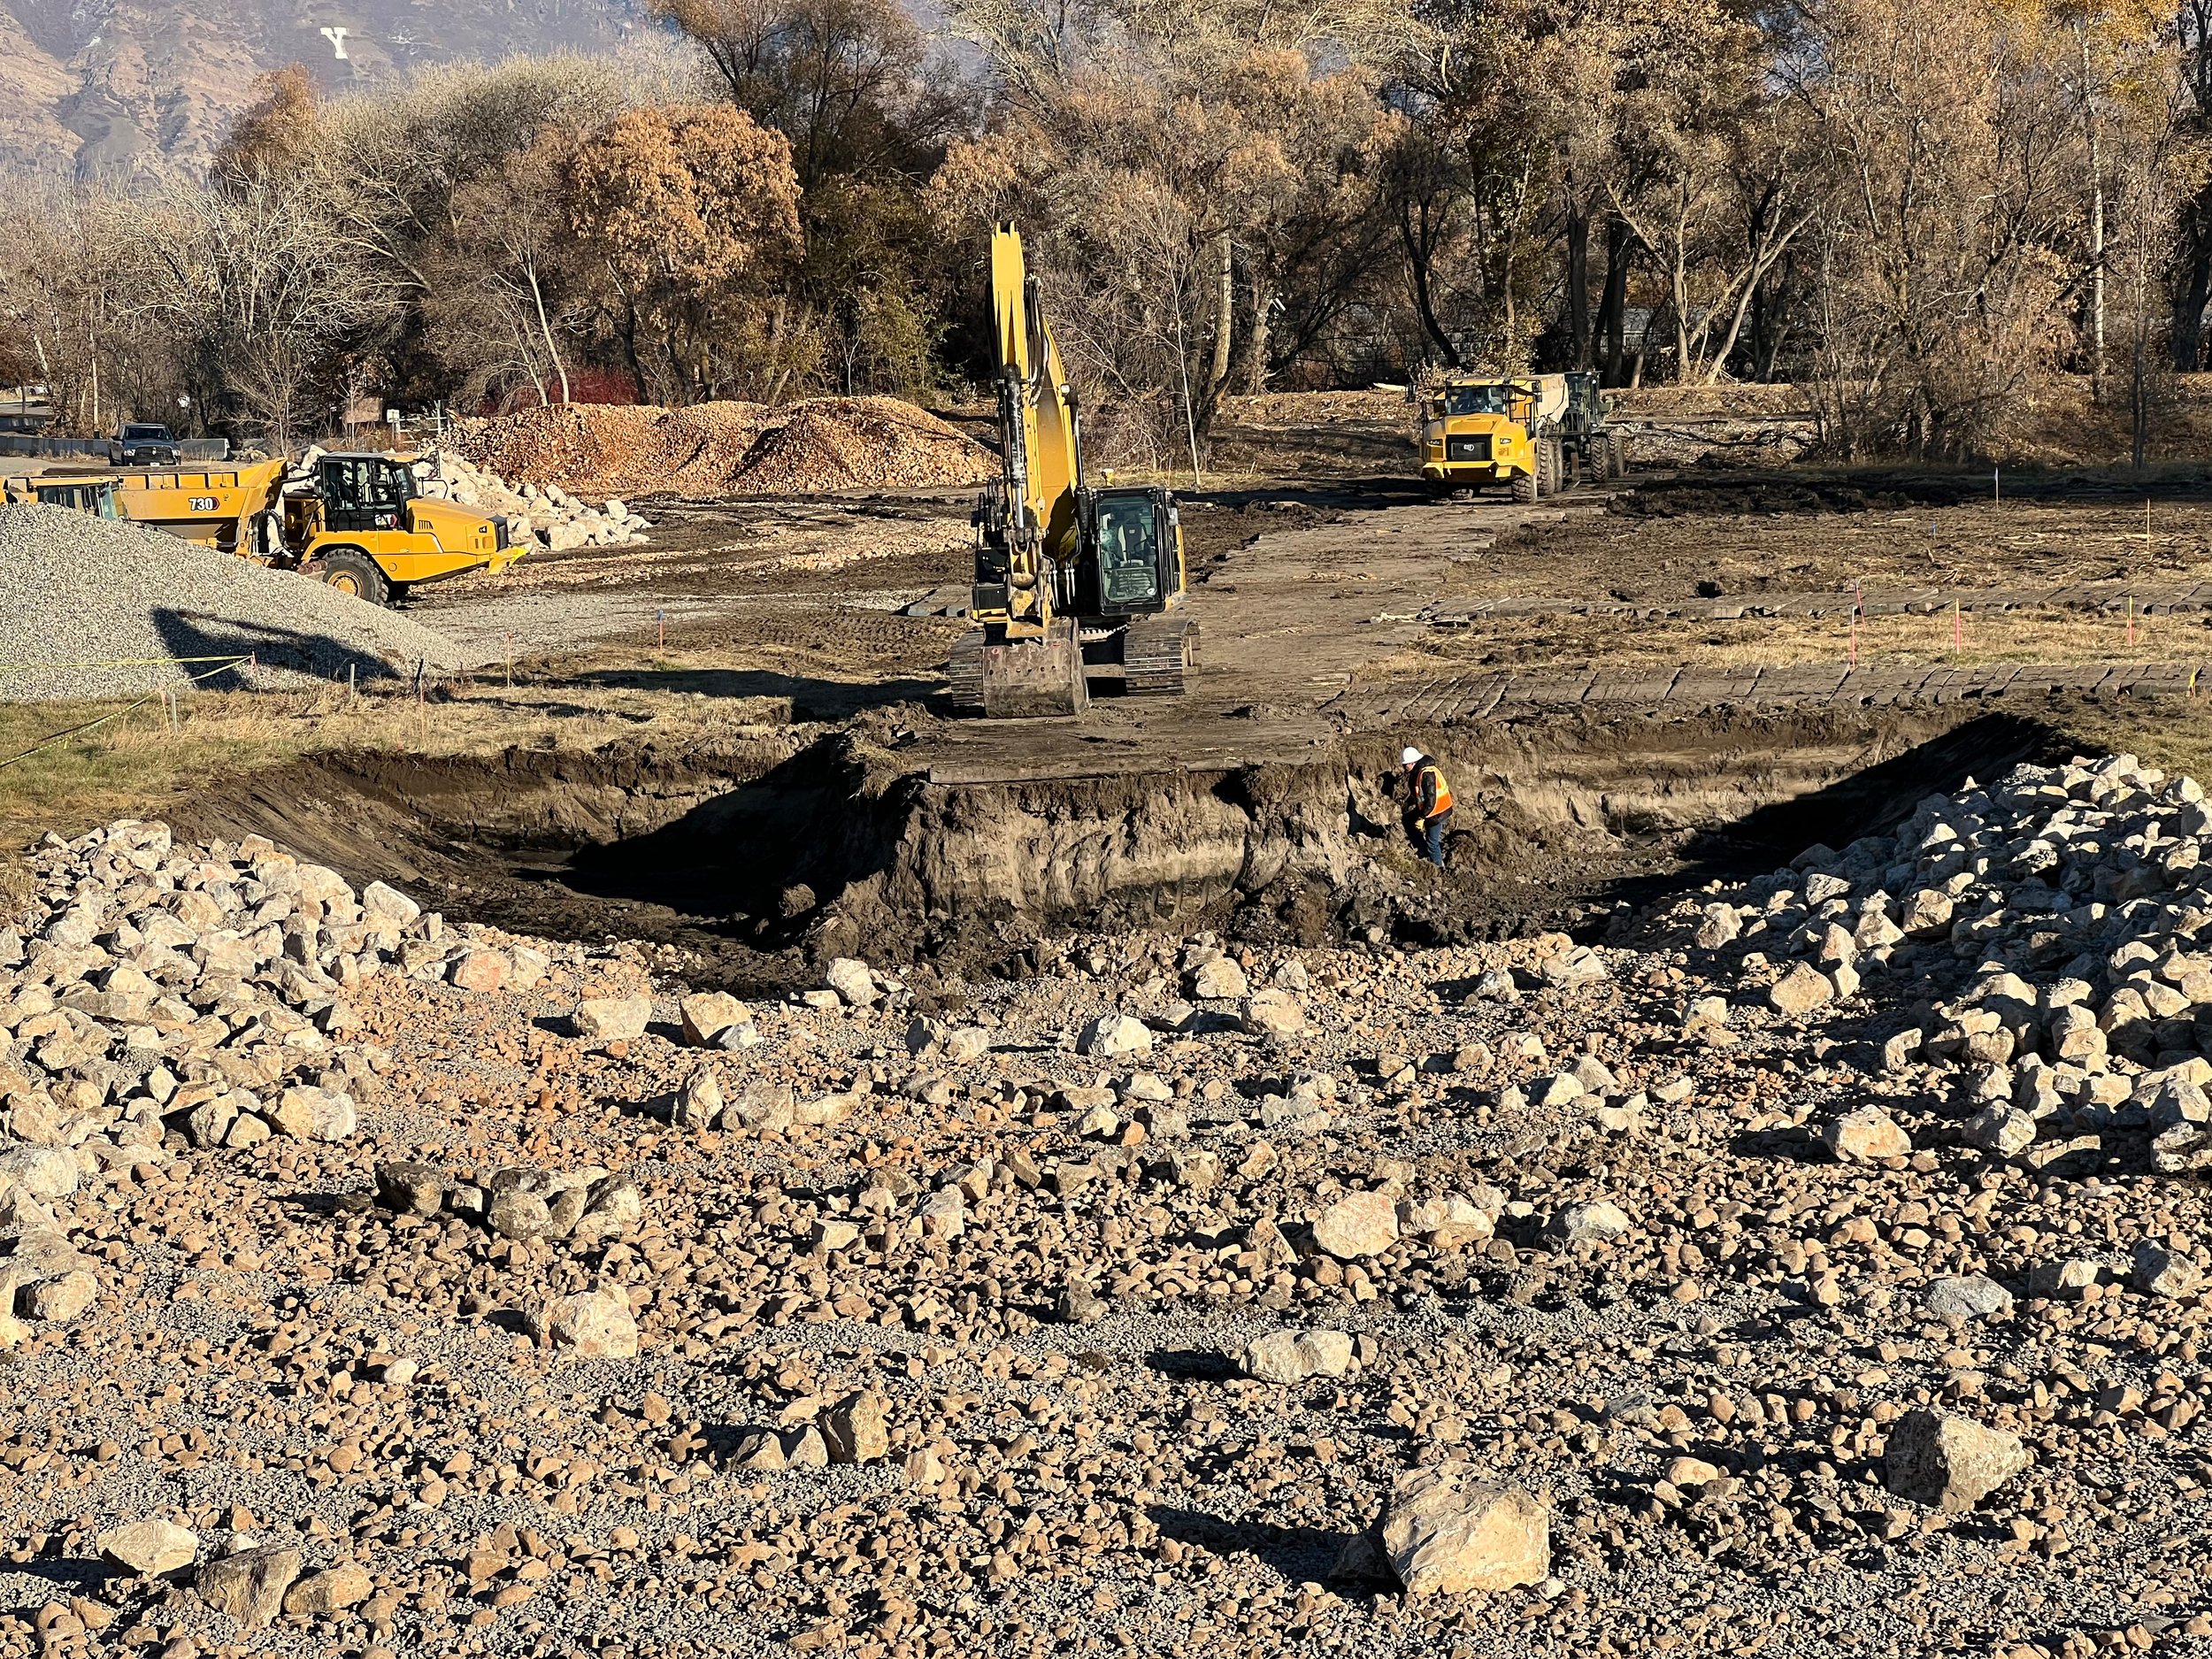  Final reaches on Provo River channel construction Nov 2022.  